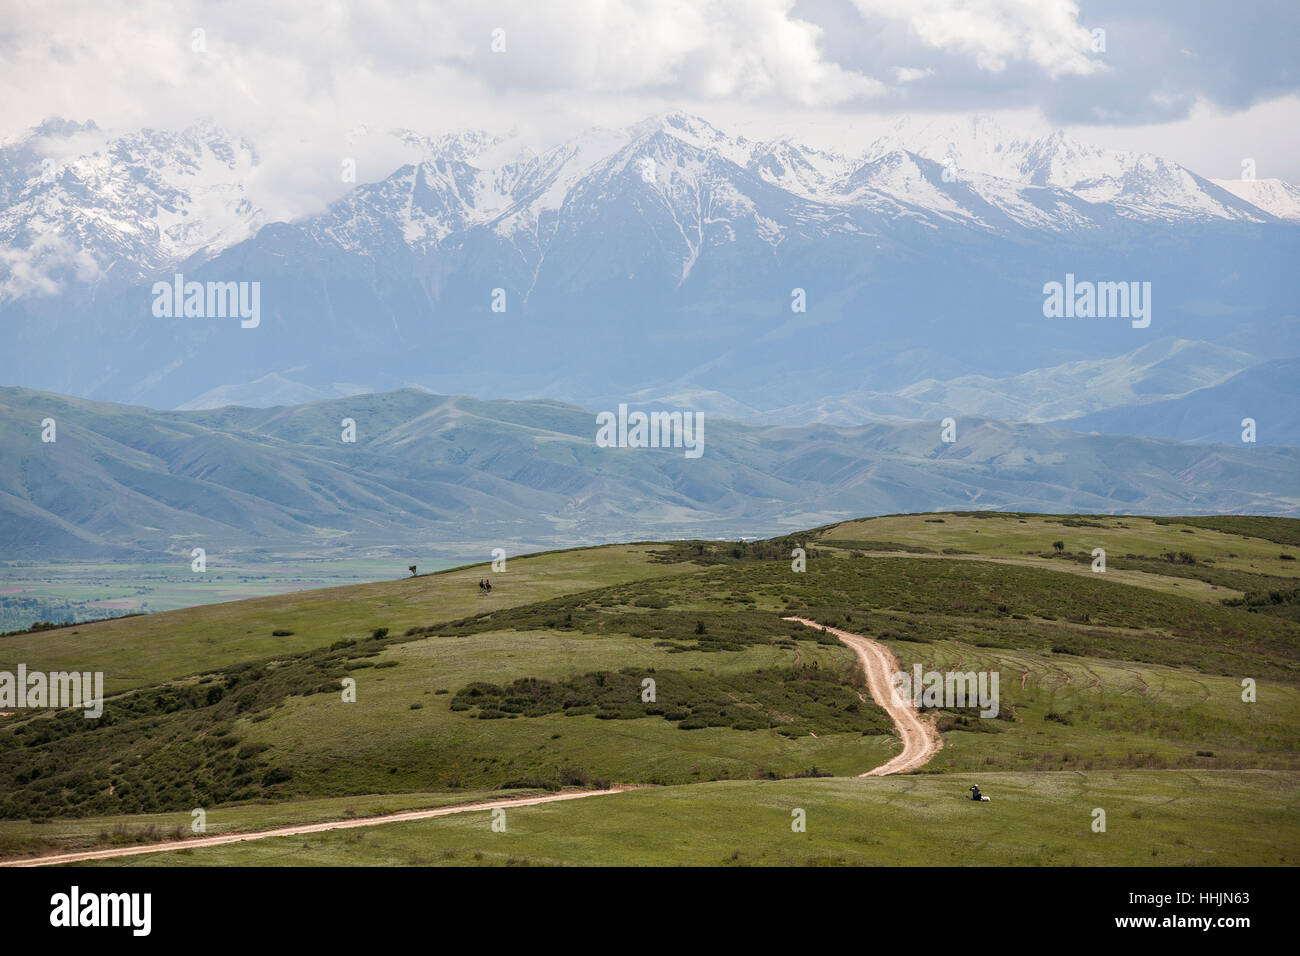 Tien shan mountains to the south of lake Issyk Kul in Kyrgyzstan, Central Asia Stock Photo